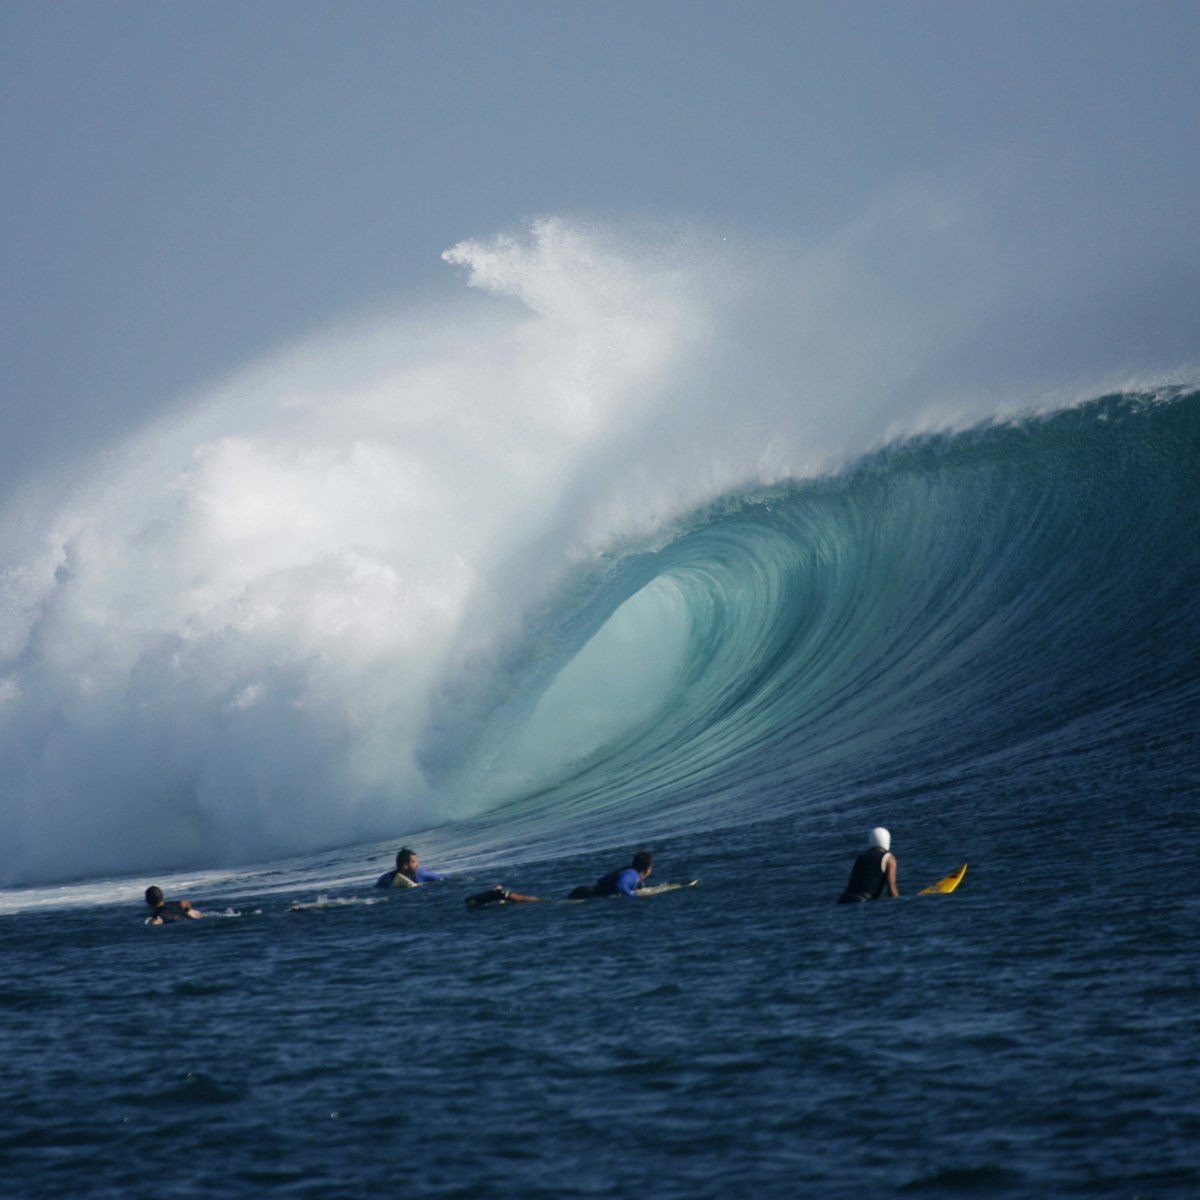 Surfers look on as a large wave rolls through at G-Land, Java, Indonesia.